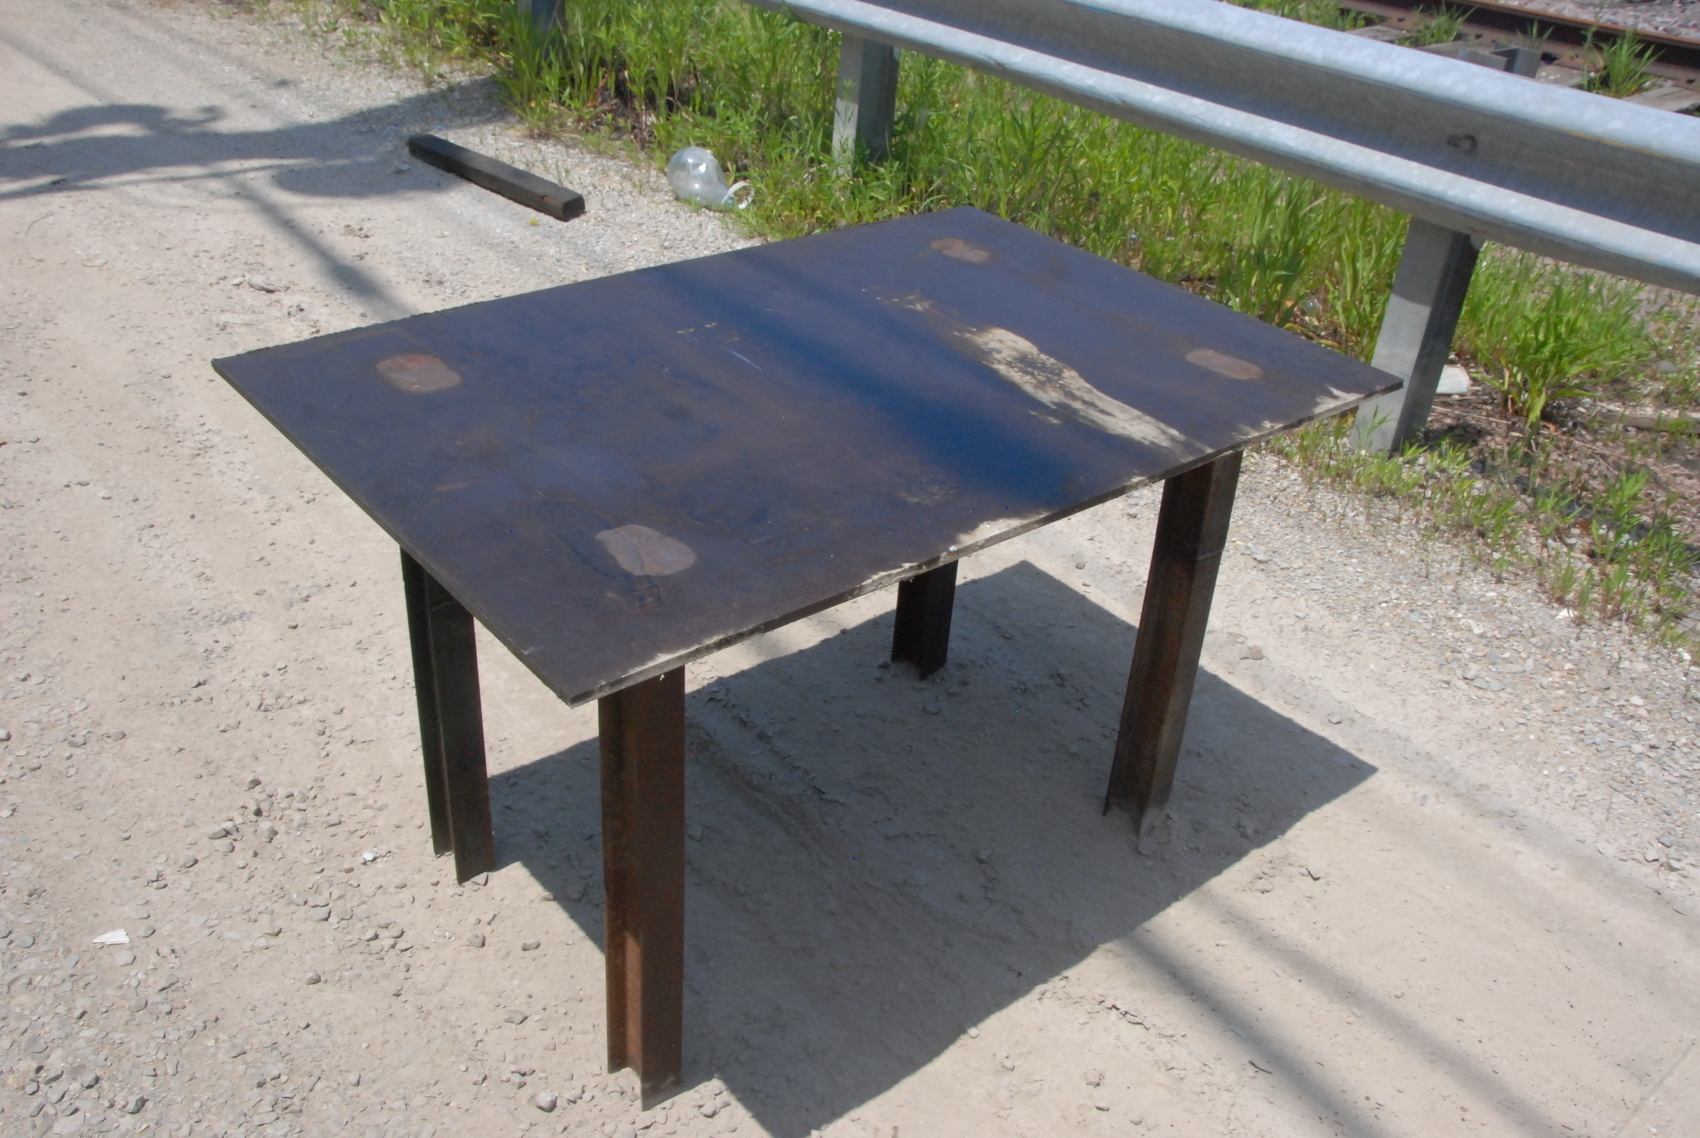 Welding table 50*33 1/2*30,3/8"thick